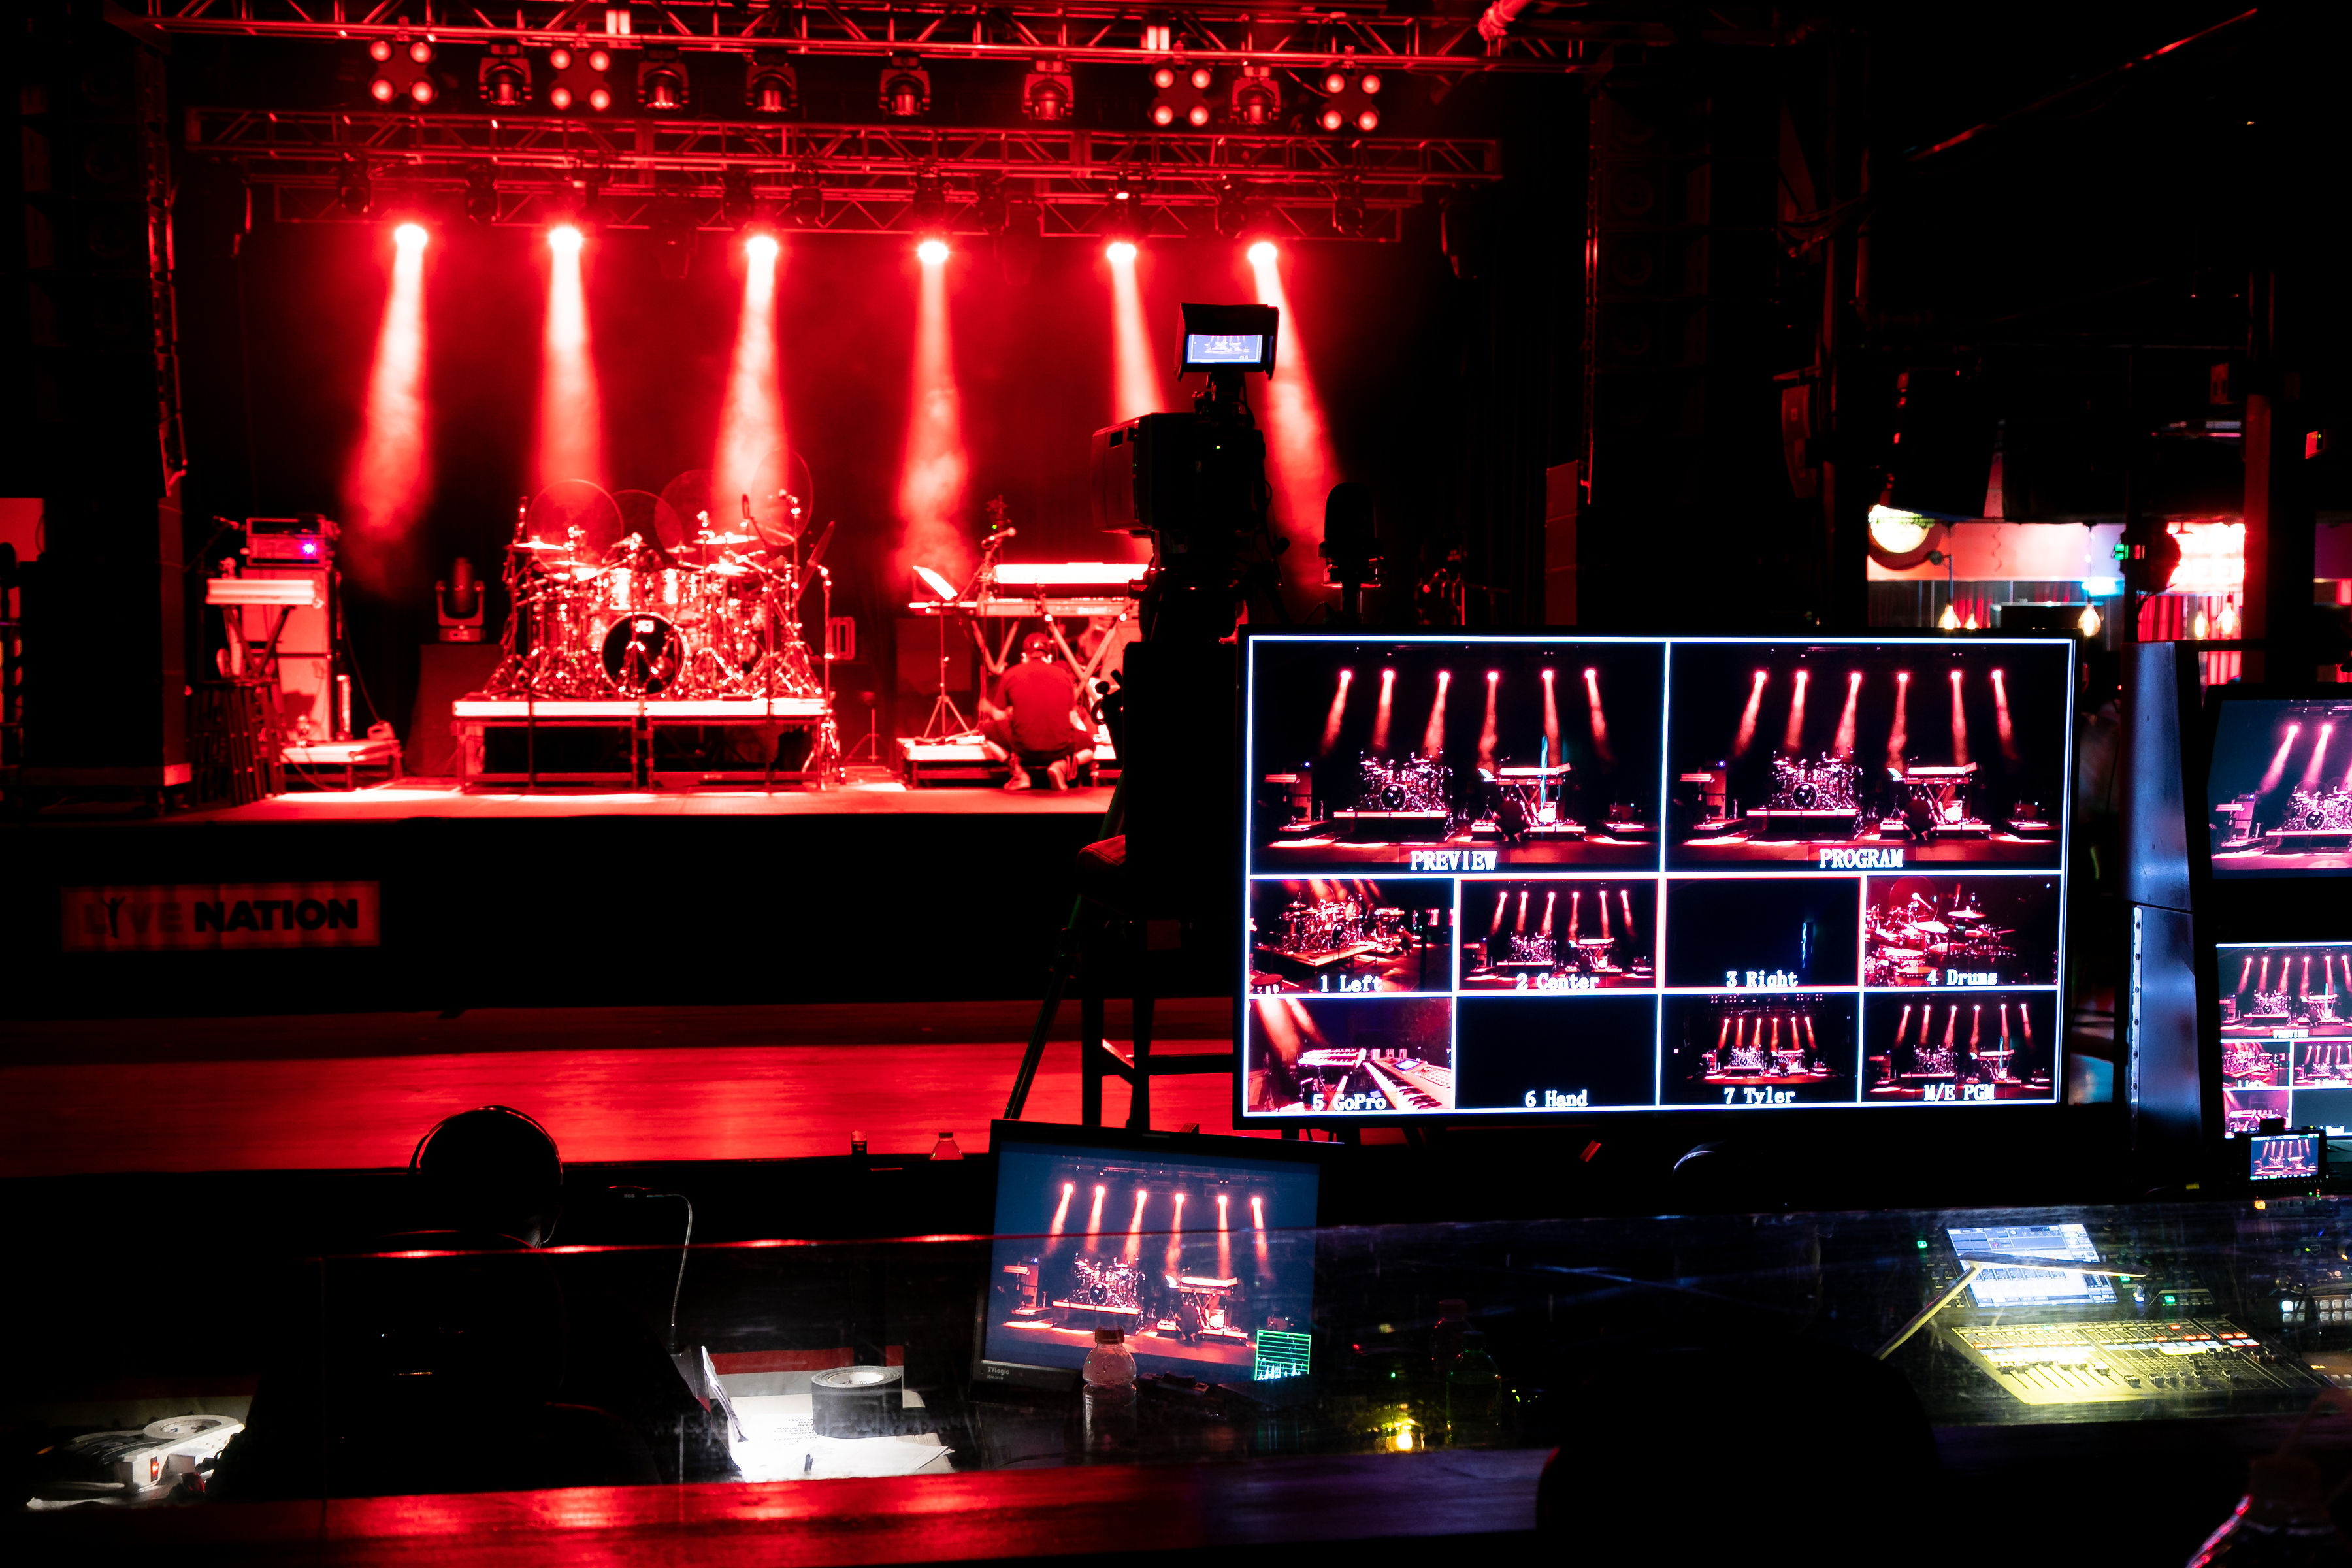 filming of a live event at a live nation special events venue